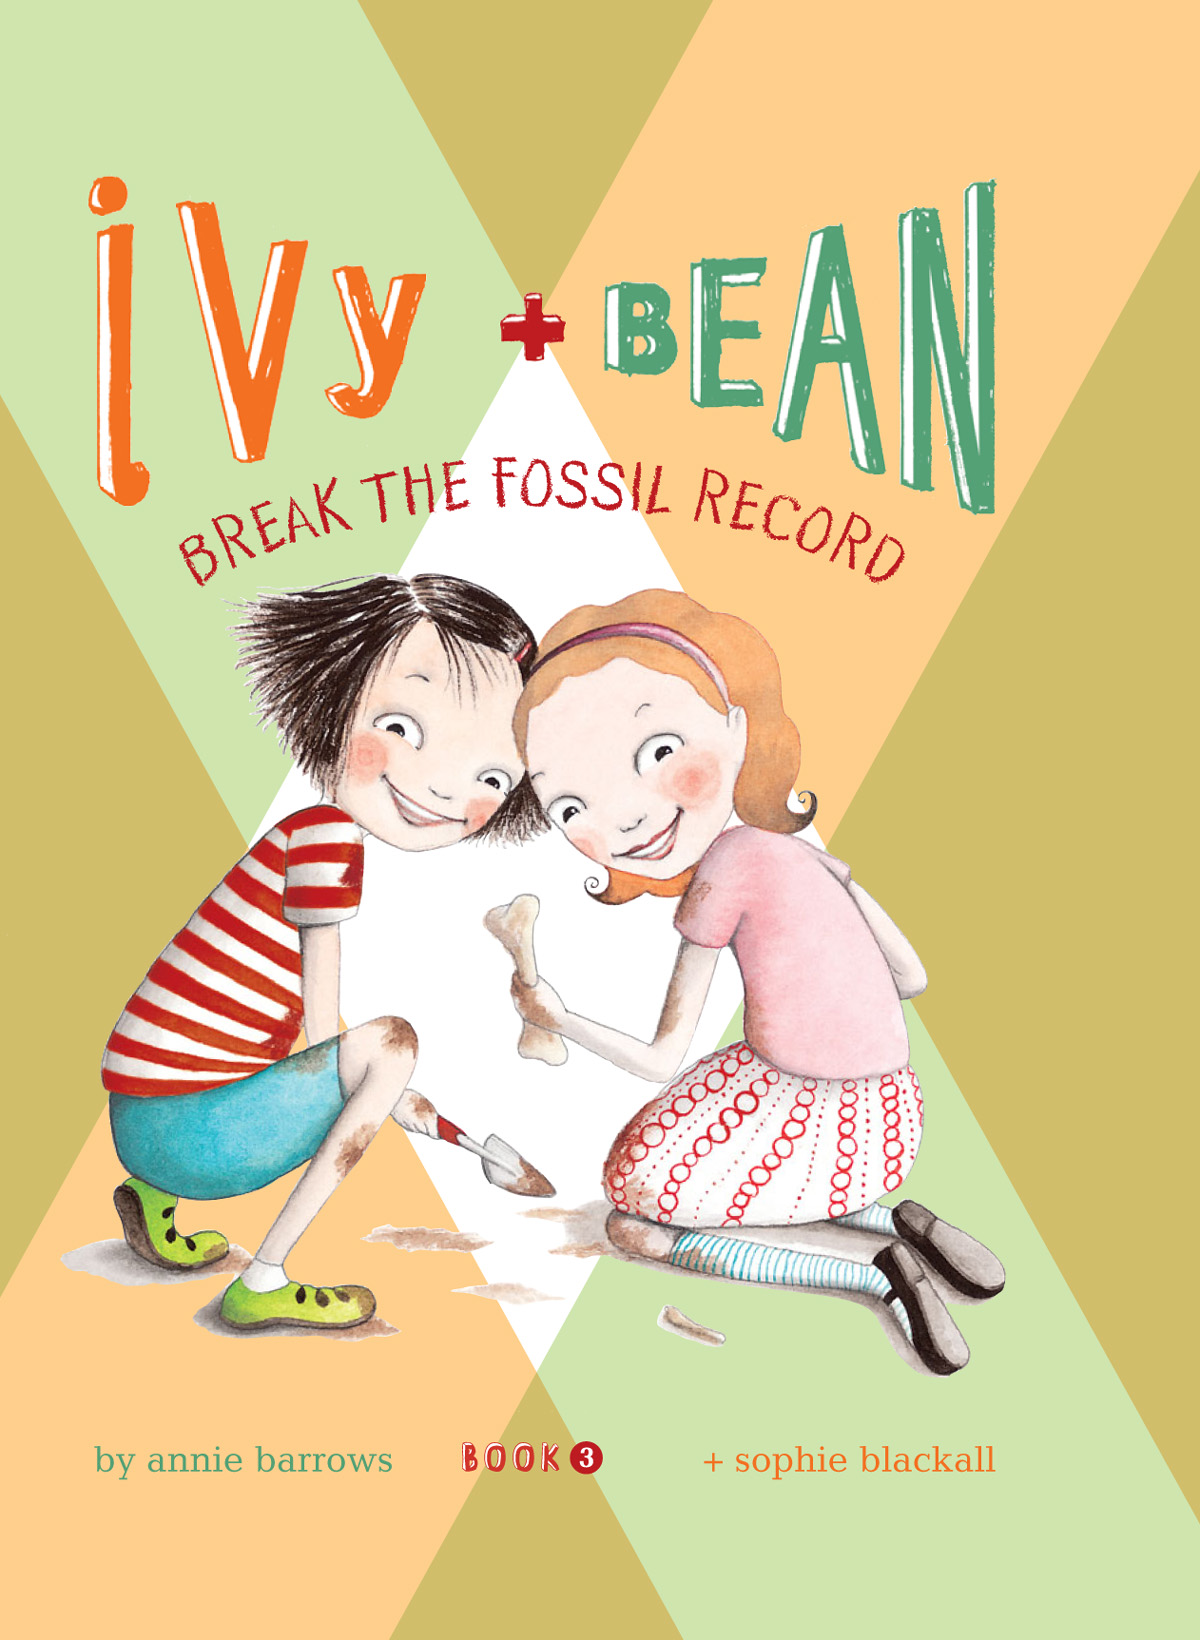 Ivy and Bean Break the Fossil Record (2007) by Annie Barrows